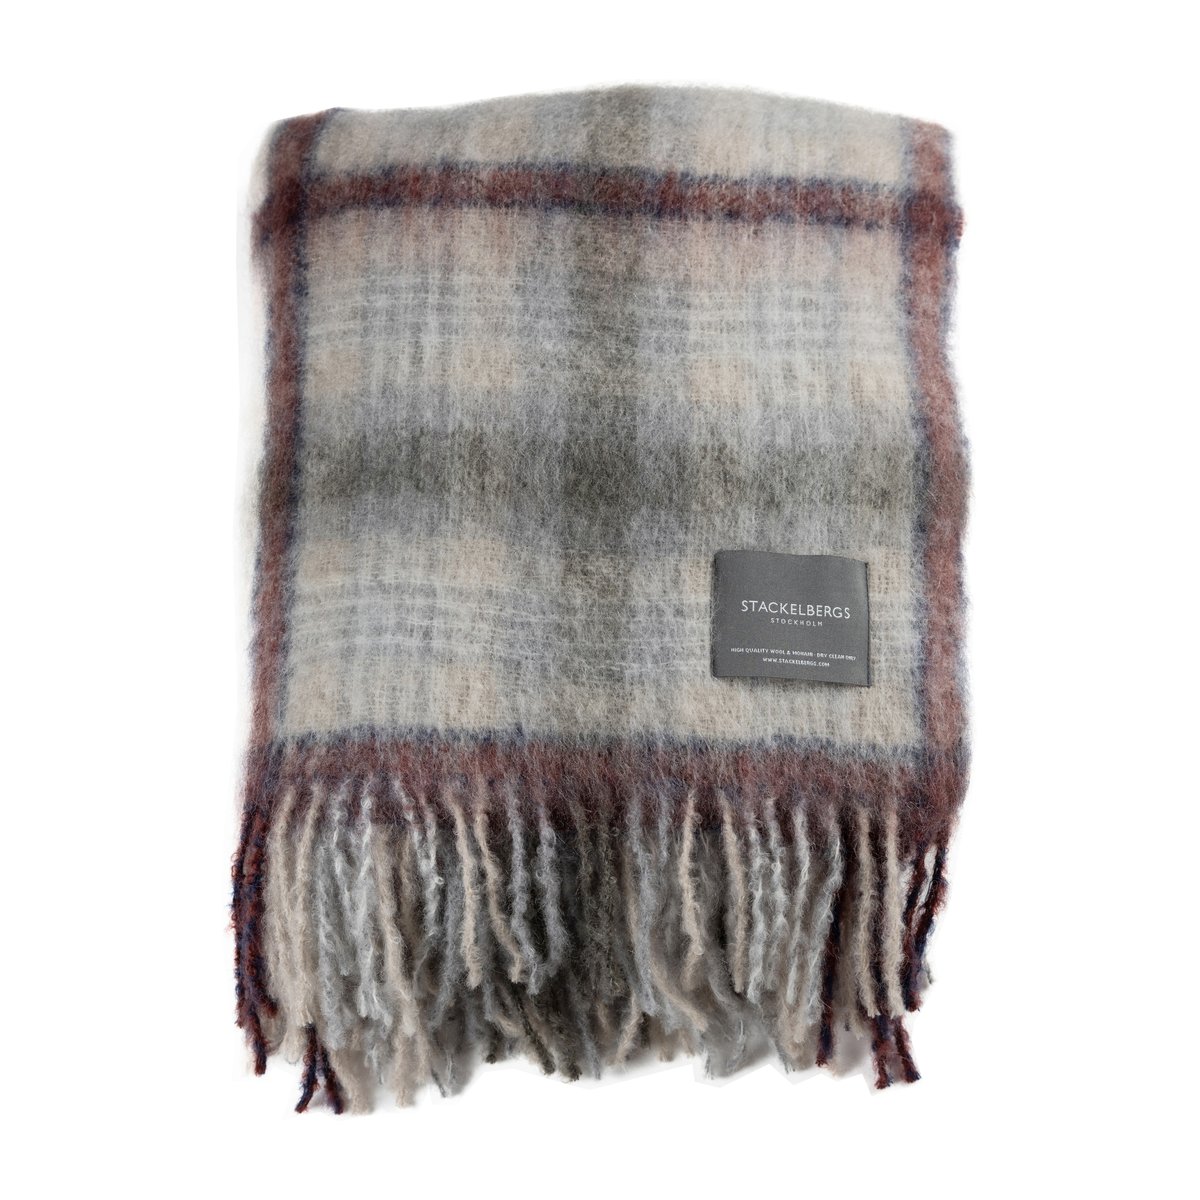 Stackelbergs Mohair plaid Camel-beige & fired earth